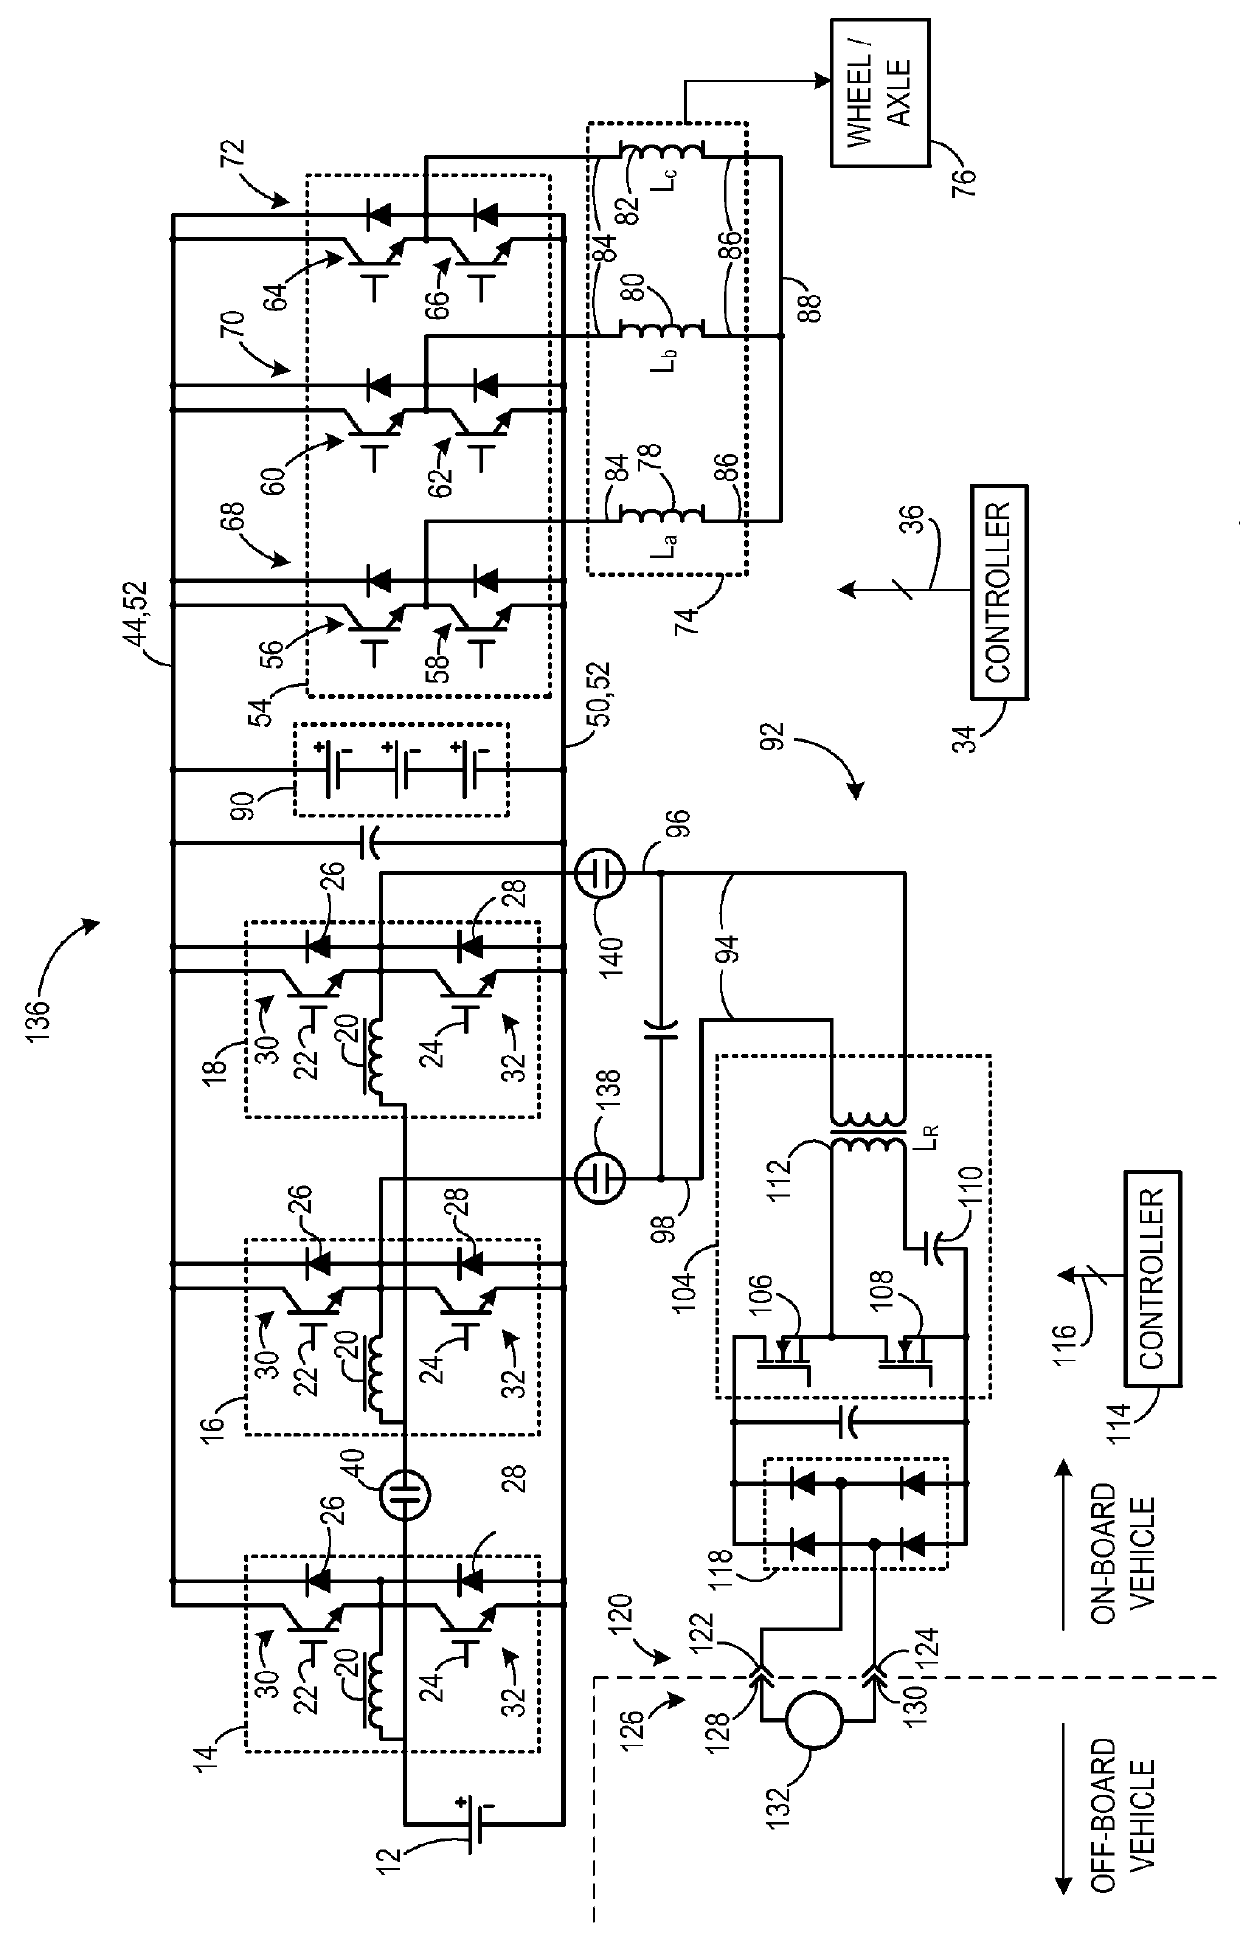 Apparatus for transferring energy using onboard power electronics with high-frequency transformer isolation and method of manufacturing same